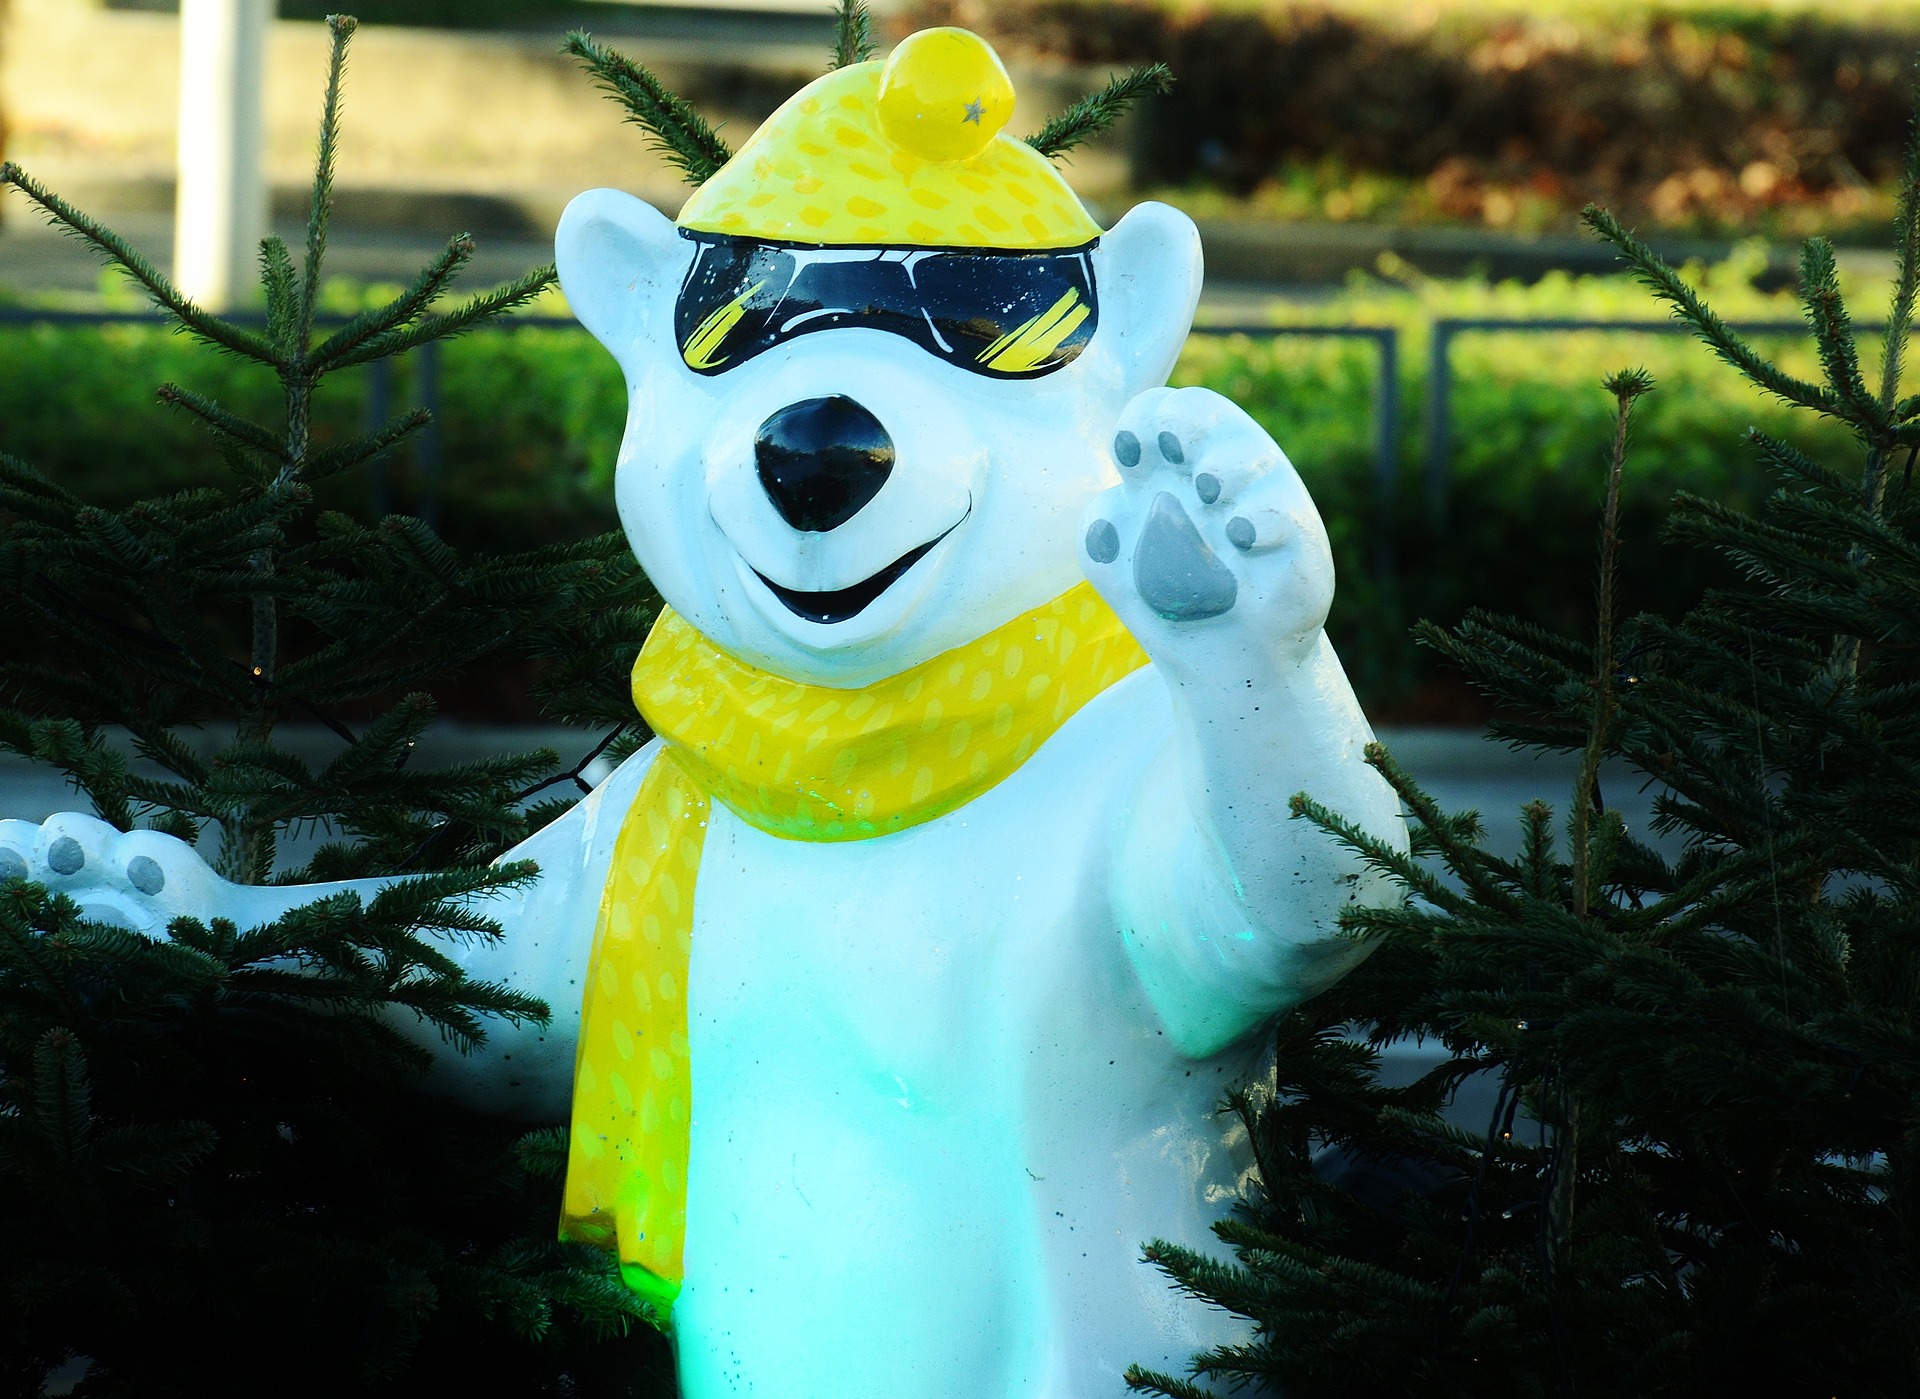 Cool and cute polar bear with yellow scarf and sunglasses